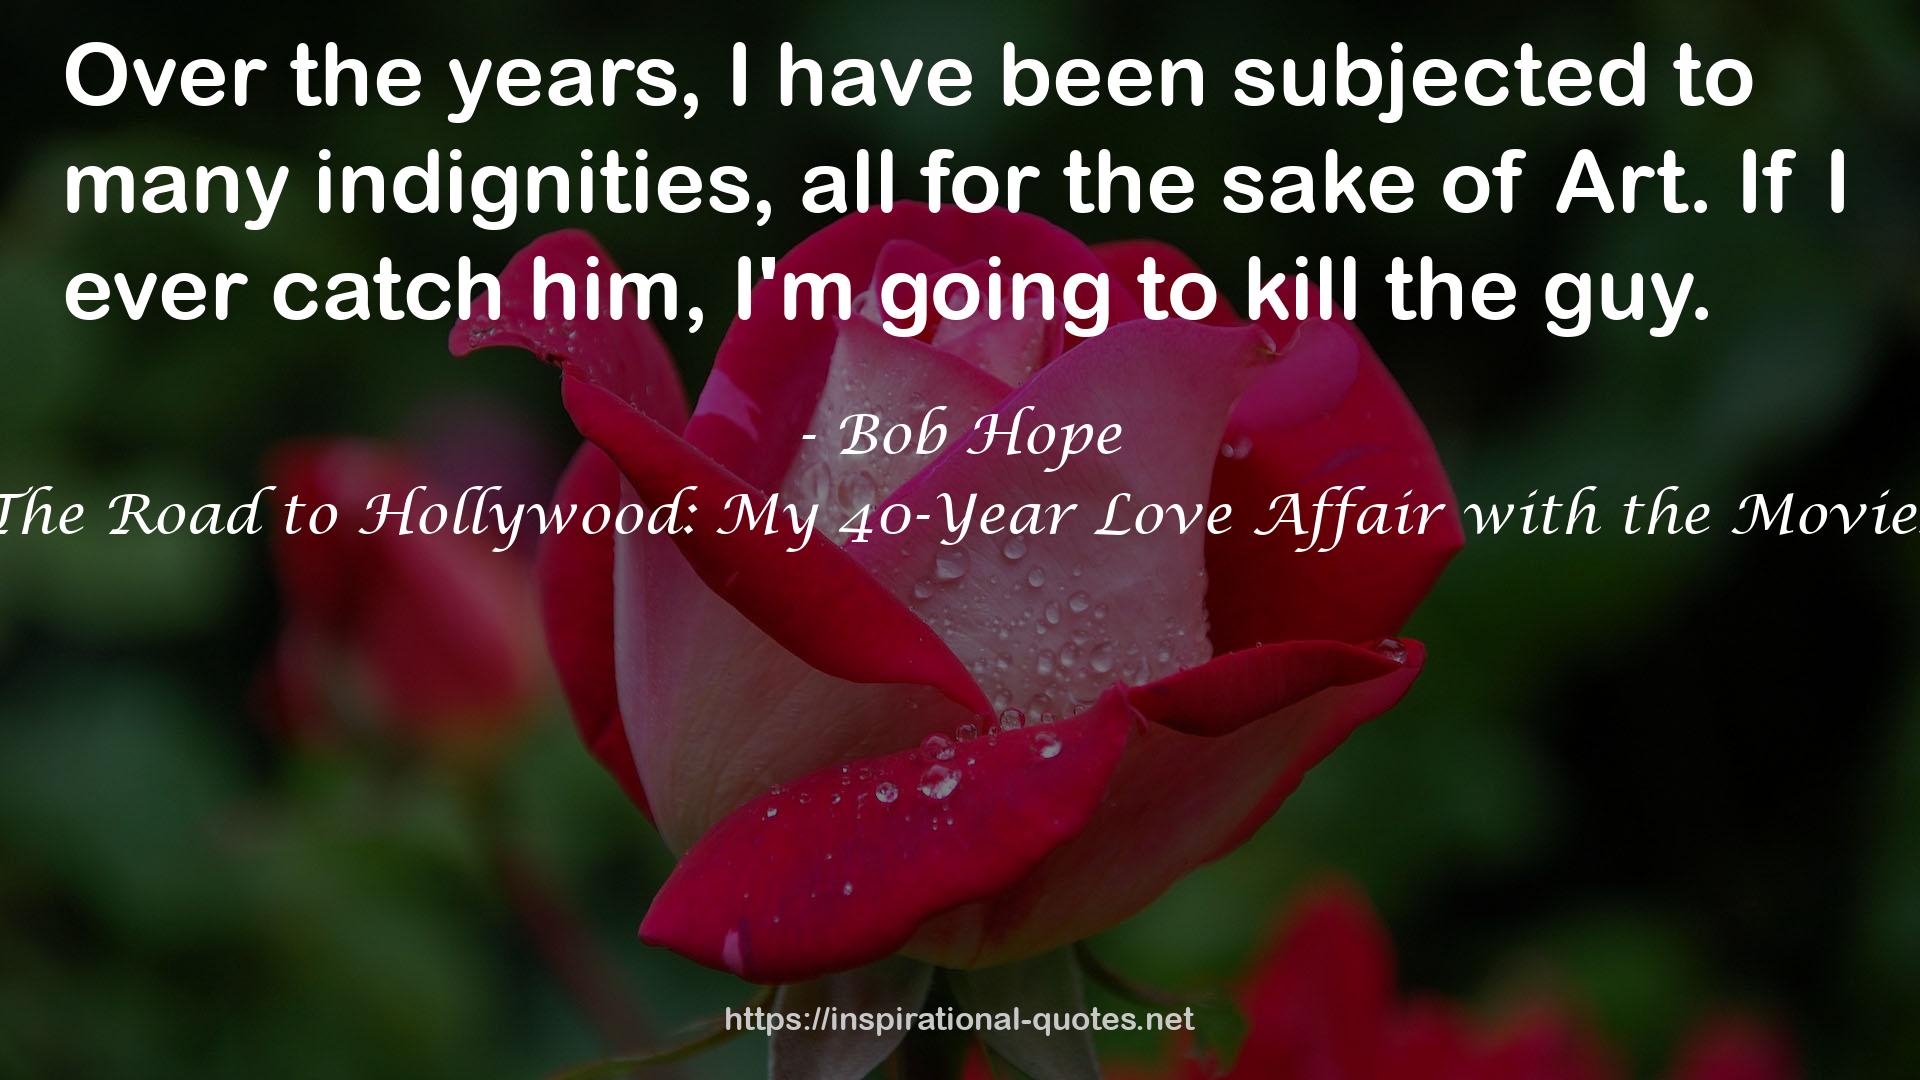 The Road to Hollywood: My 40-Year Love Affair with the Movies QUOTES